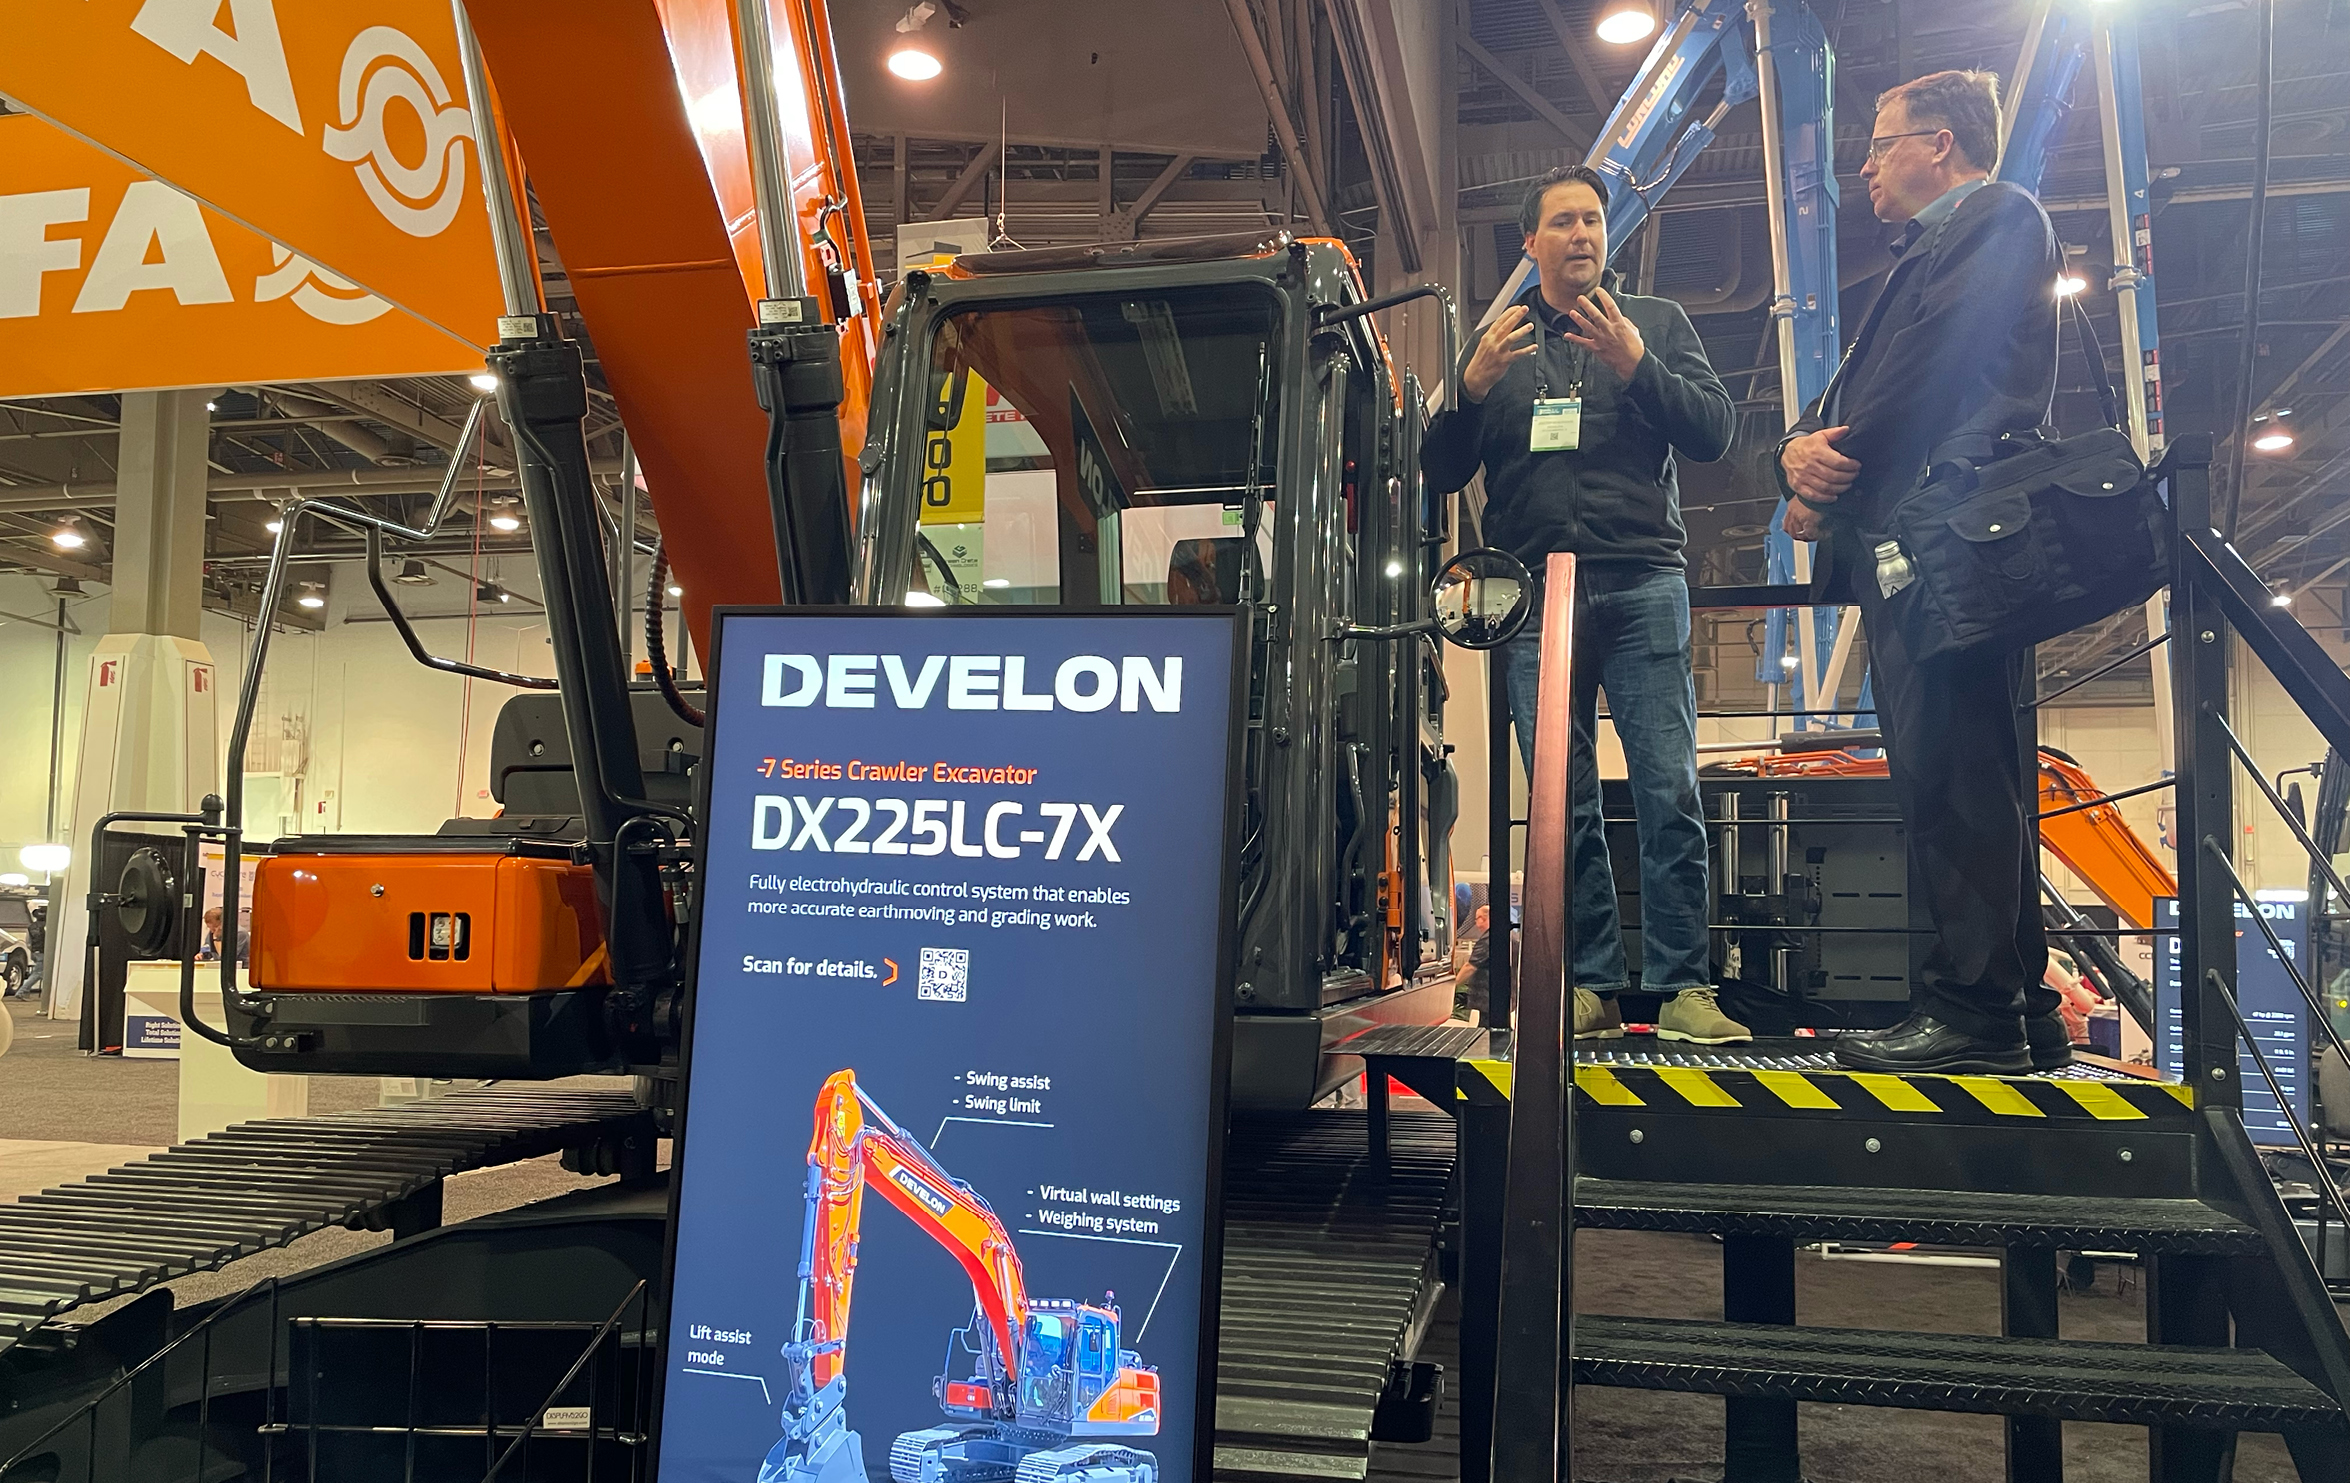 DEVELON representative speaks with attendee about DX225LC-7X crawler excavator.